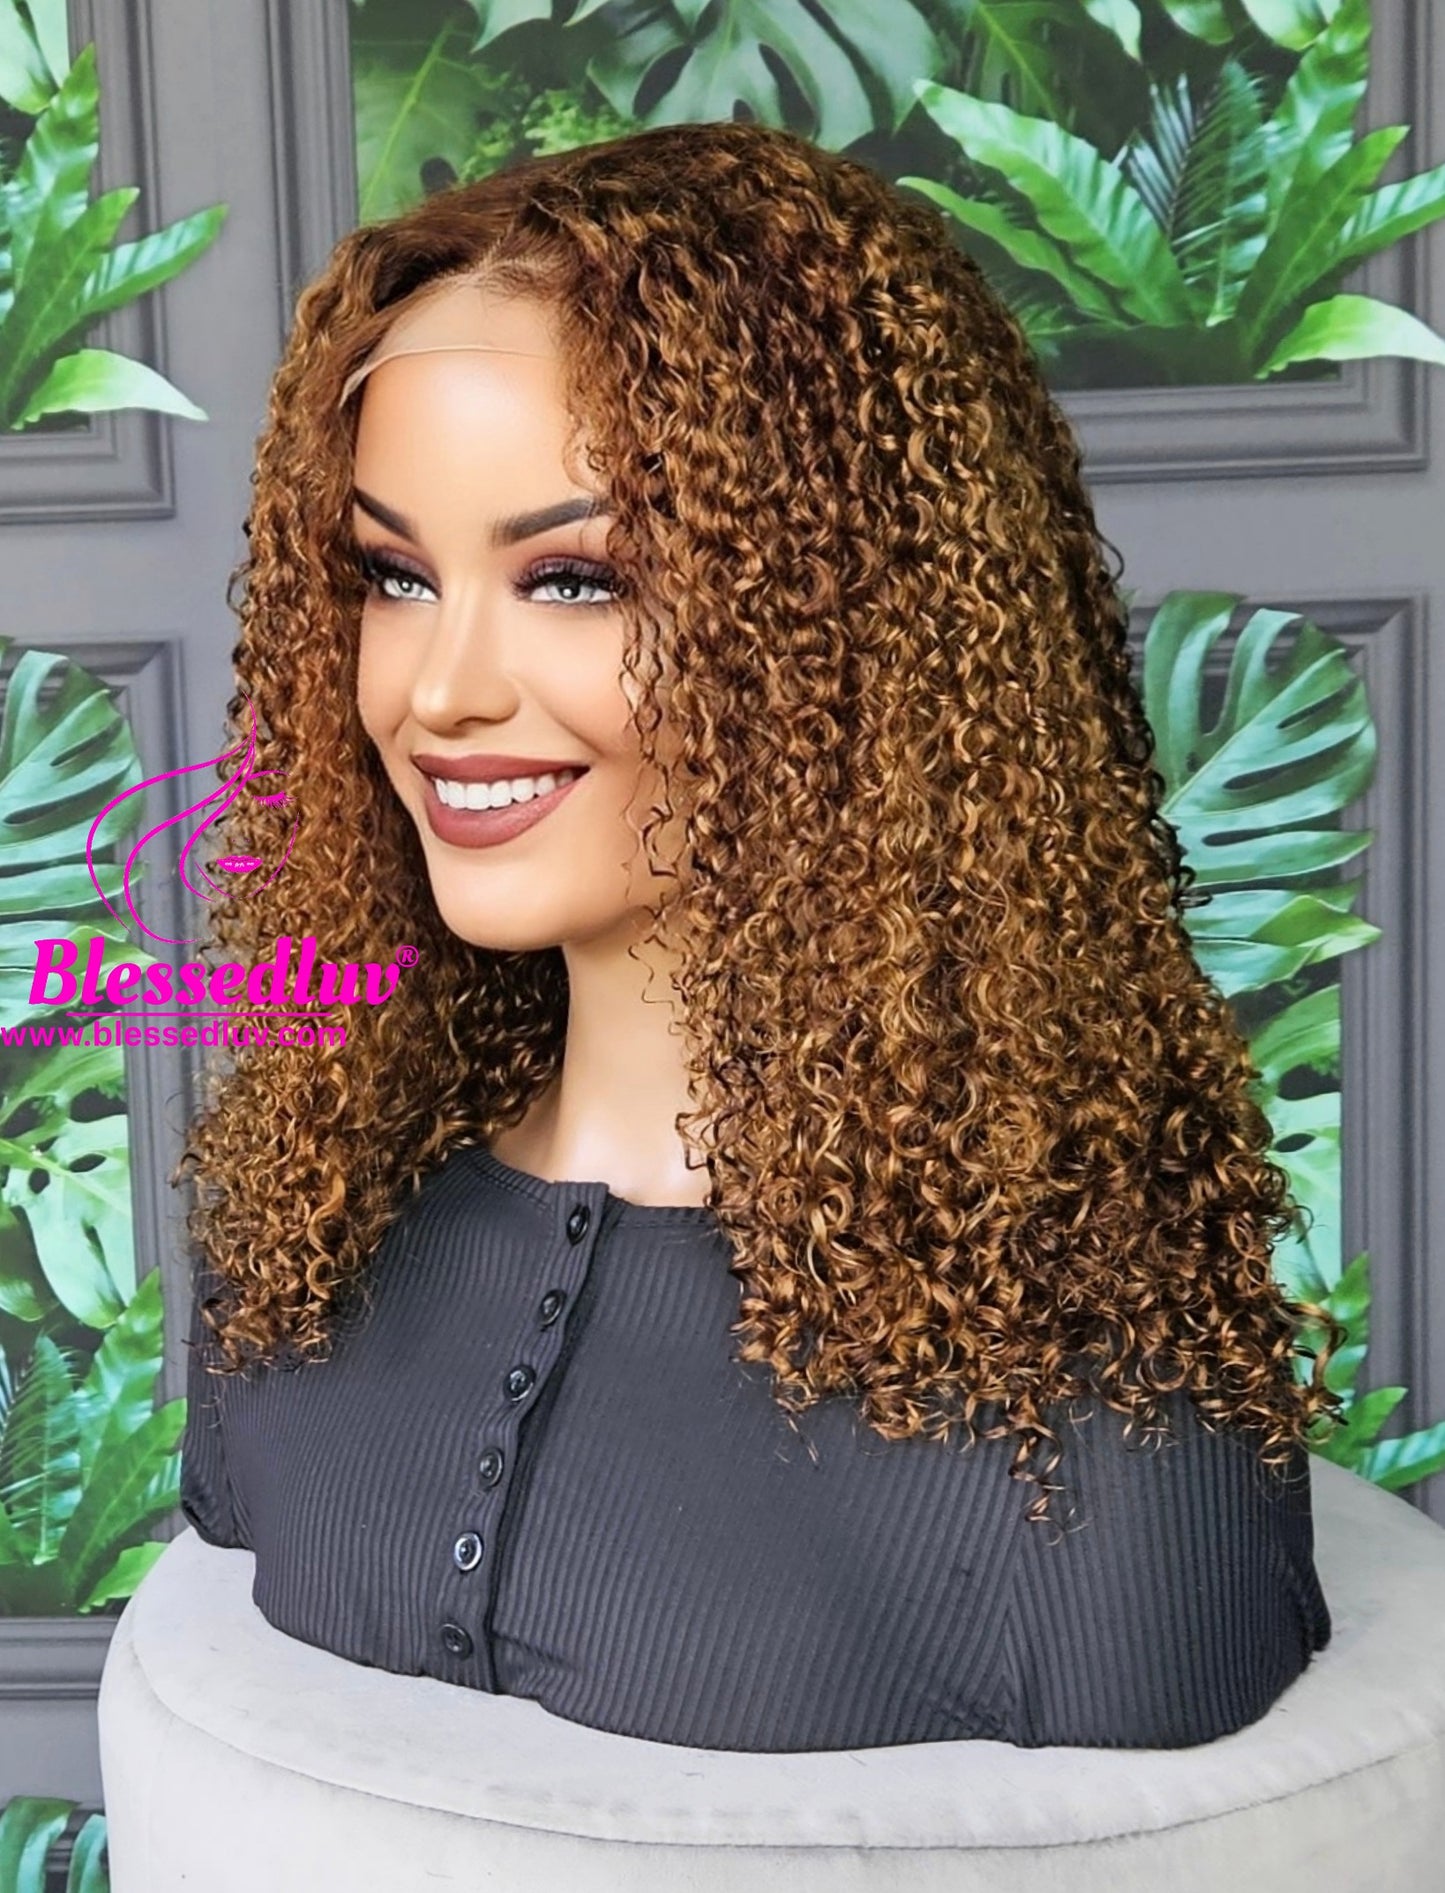 London - Luxury Curly Balayage Lace Closure Wig - Center Parting-WIG-www.blessedluv.com-Brazilianweave.com